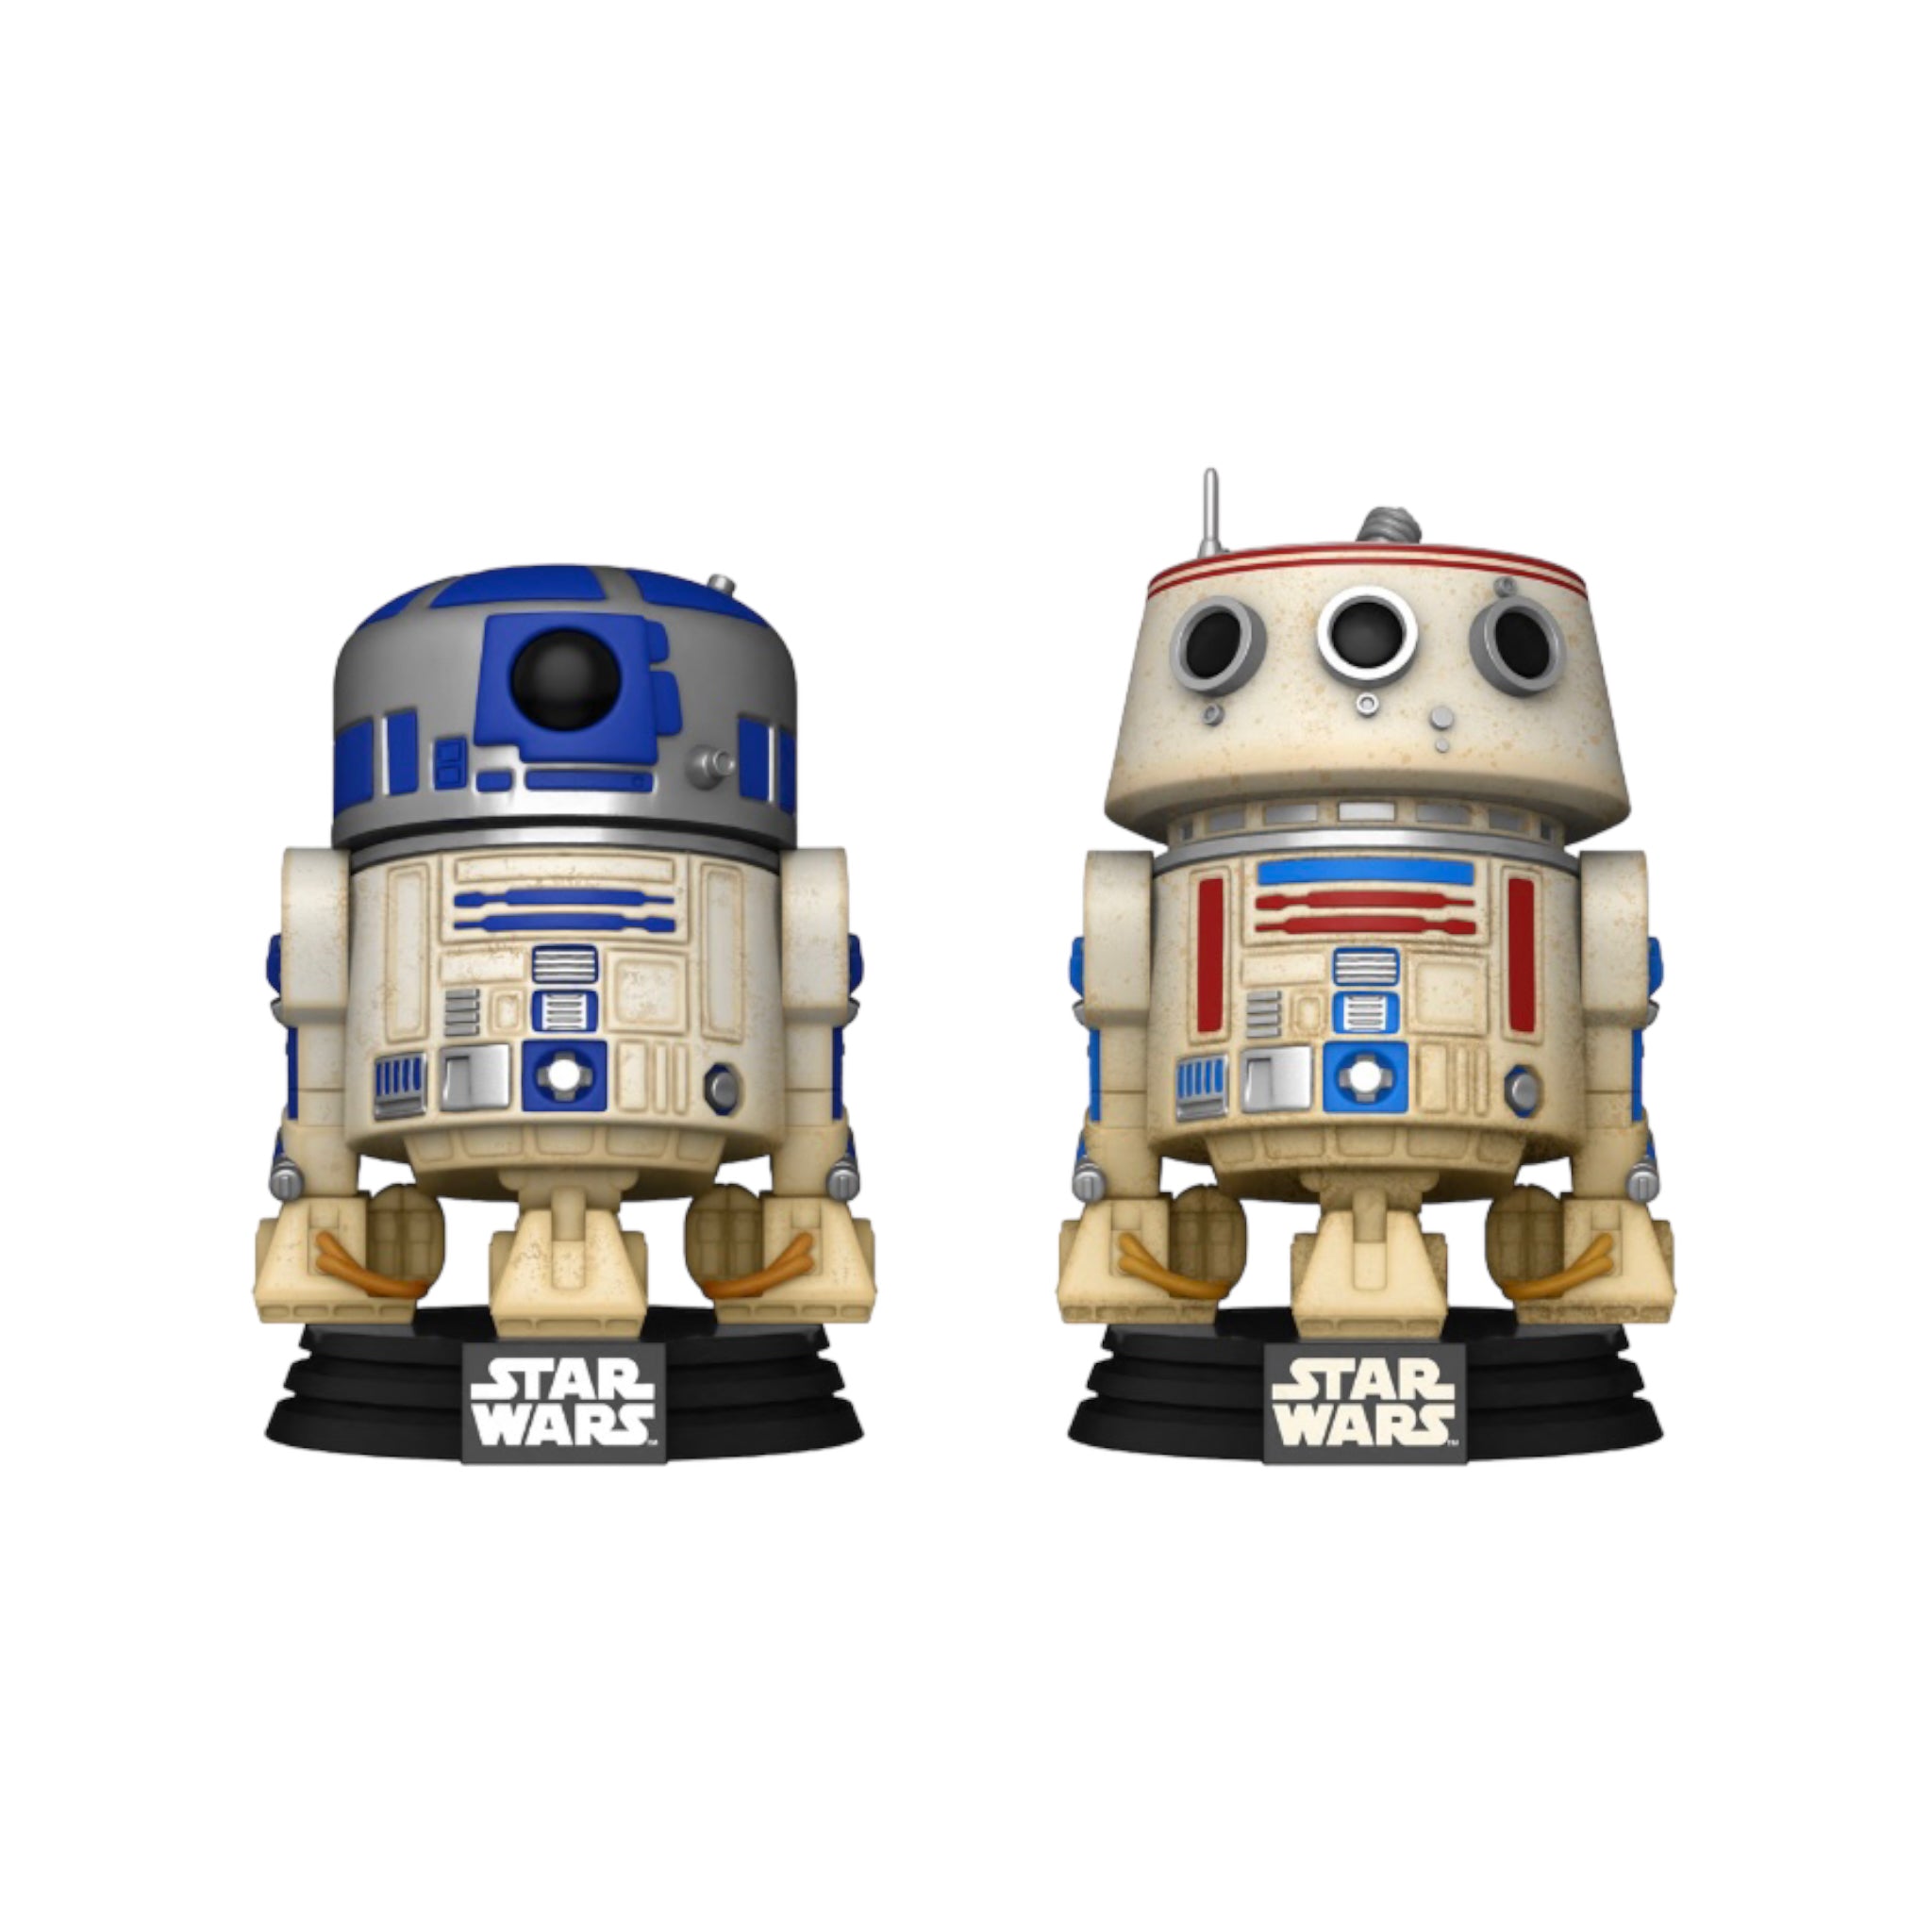 R2-D2 & R5-D4 2 Pack Funko Pop! - Star Wars - Galactic Convention 2023 Exclusive